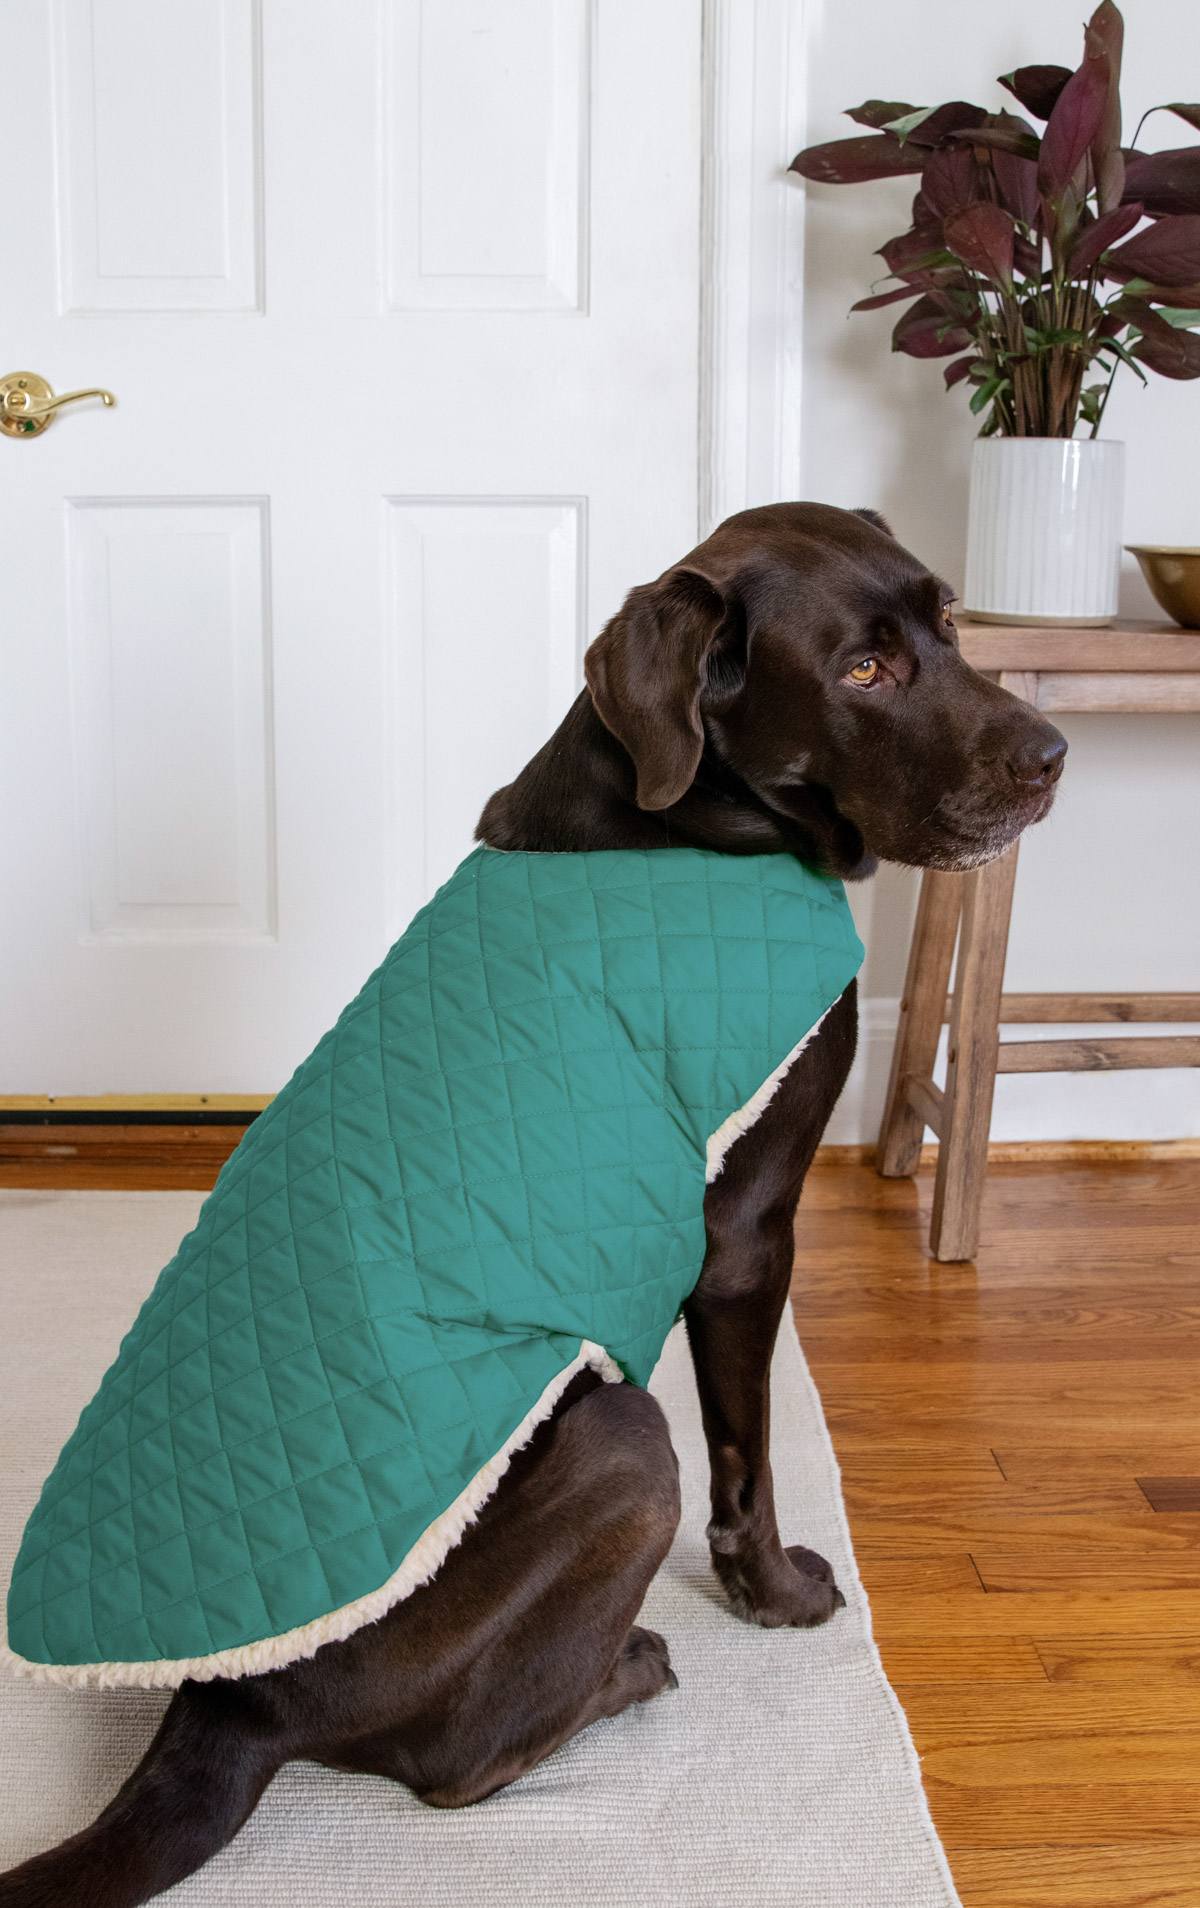 This DIY dog coat is made with ultrasoft fleece on the inside and easy-to-clean cotton on the outside to keep your pup comfy in cold weather.